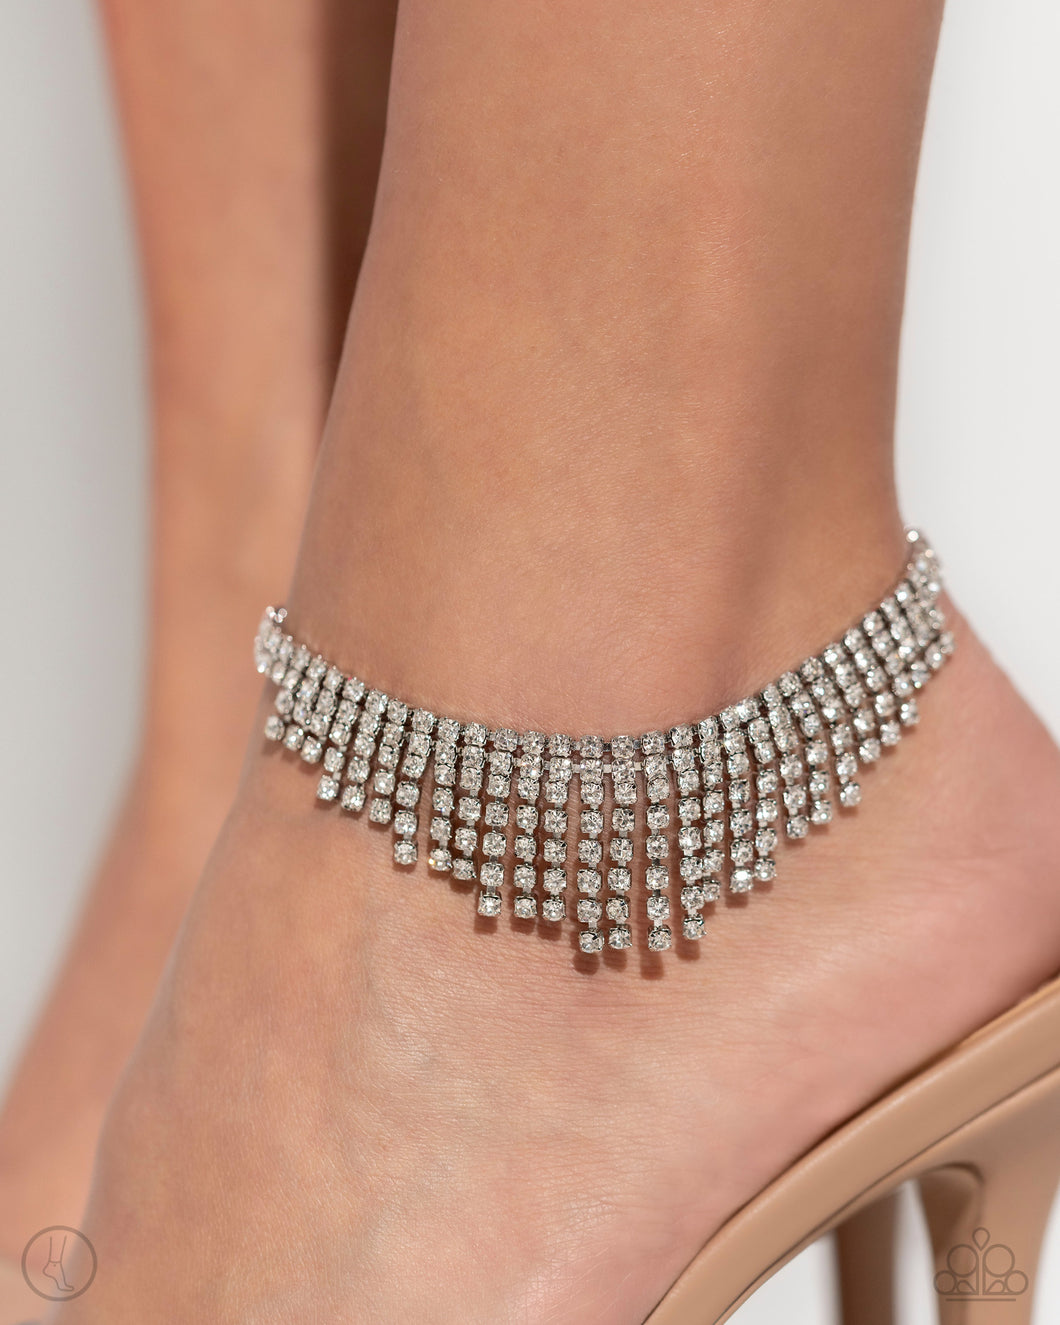 Paparazzi “Curtain Confidence” White Anklet